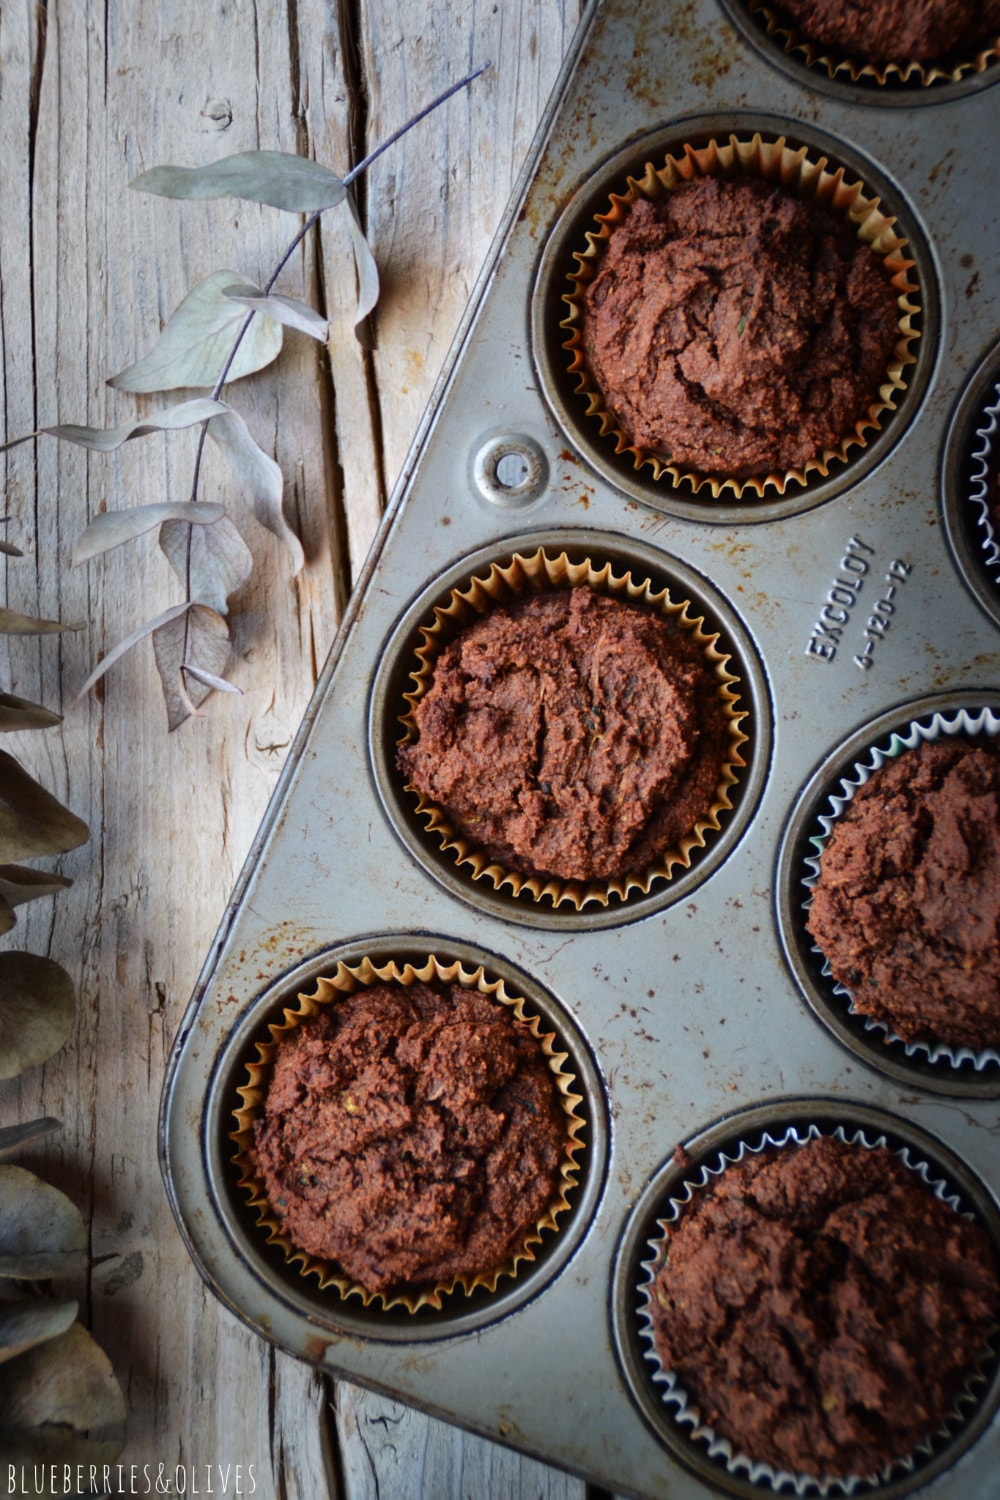 Cocoa muffins in old retro metallic pan, over old wood table, dark background, dry eucalyptus leaves, linen grey kitchen cloth